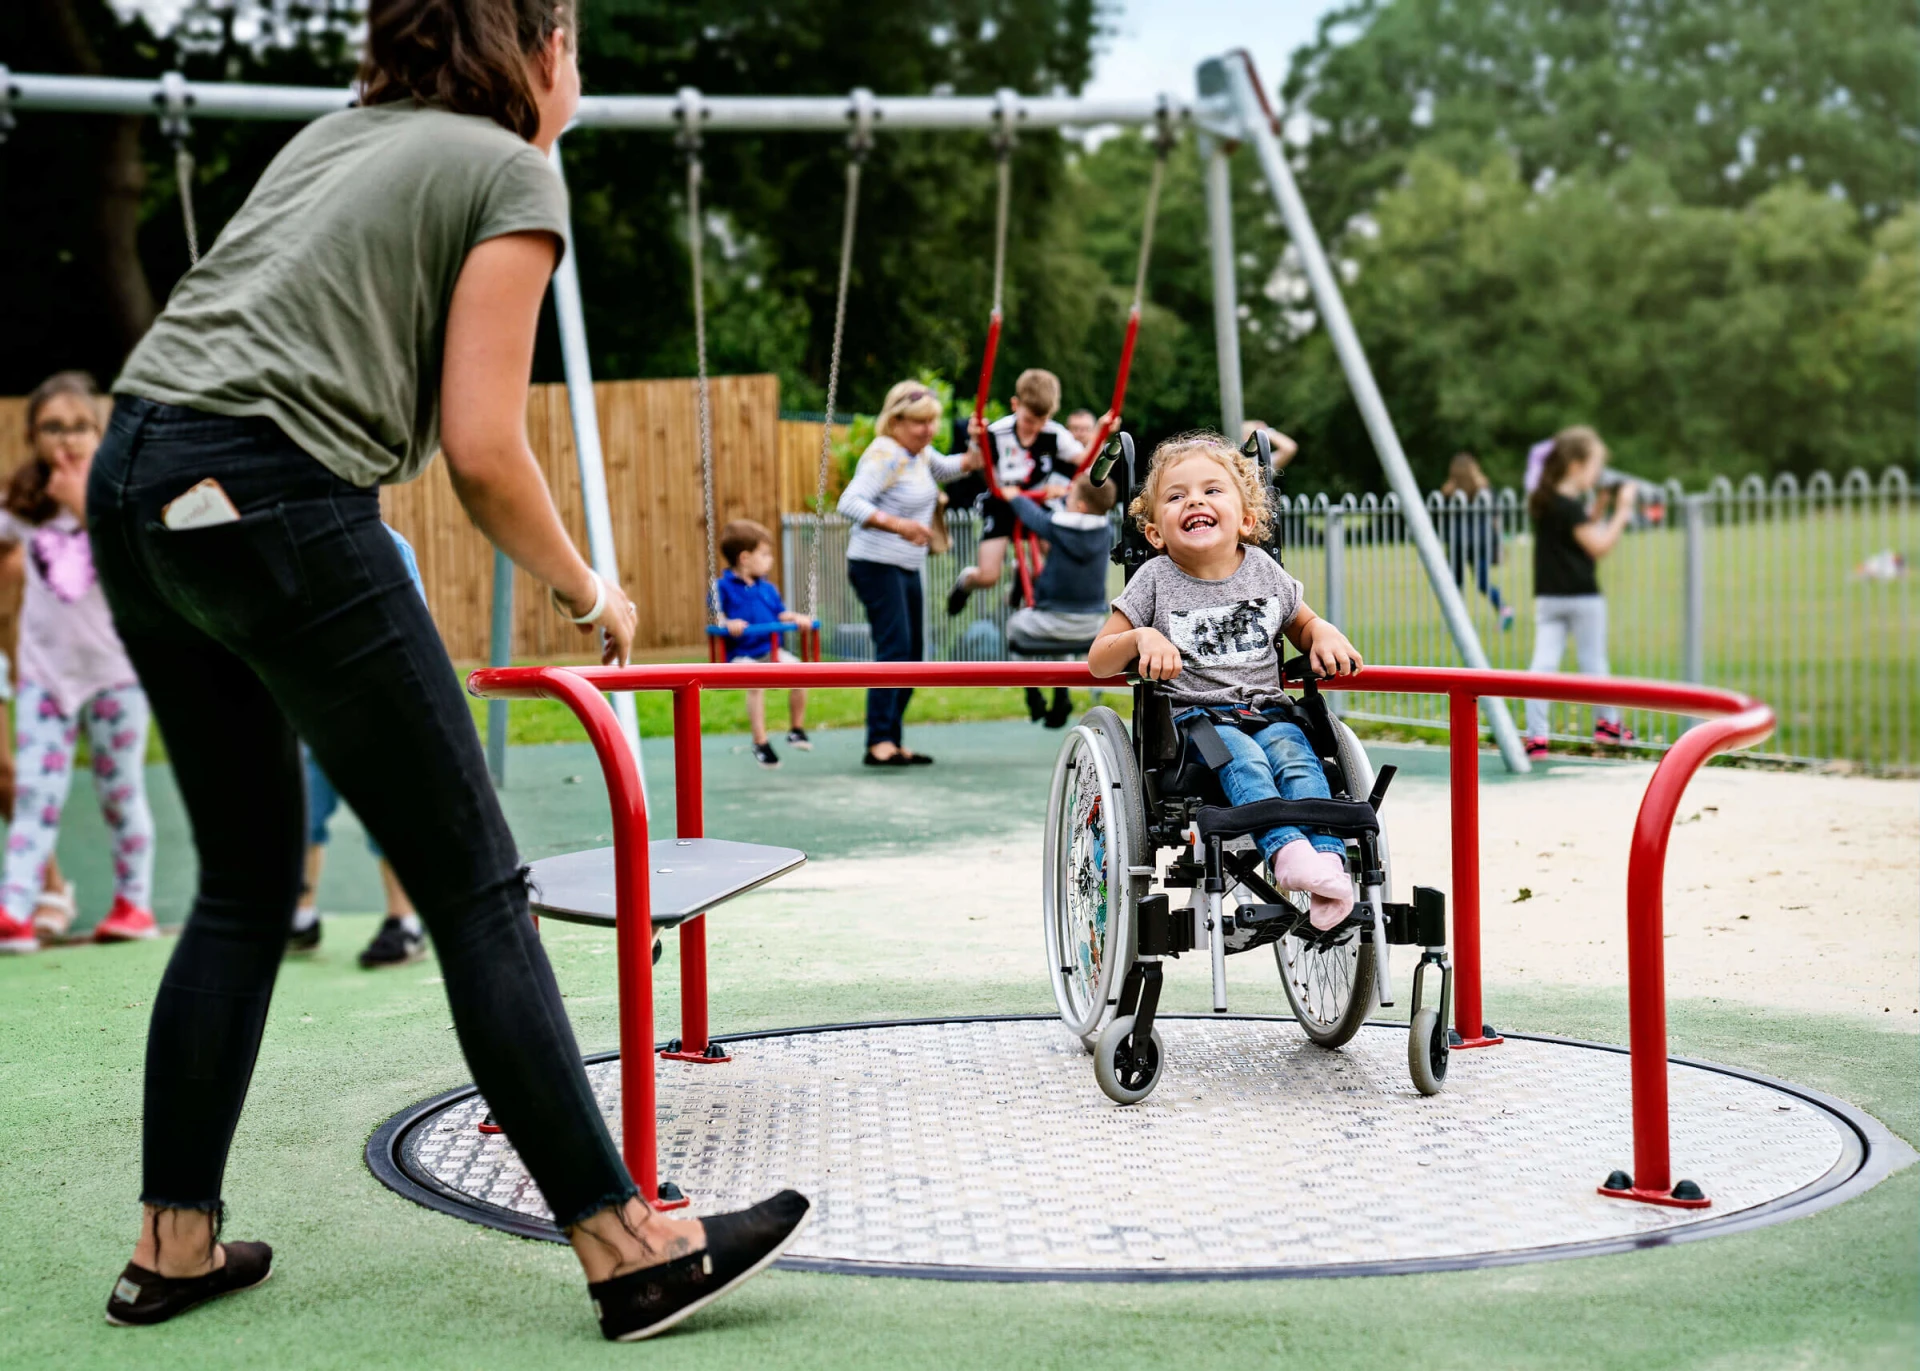 An excited child in a wheelchair playing on a playground